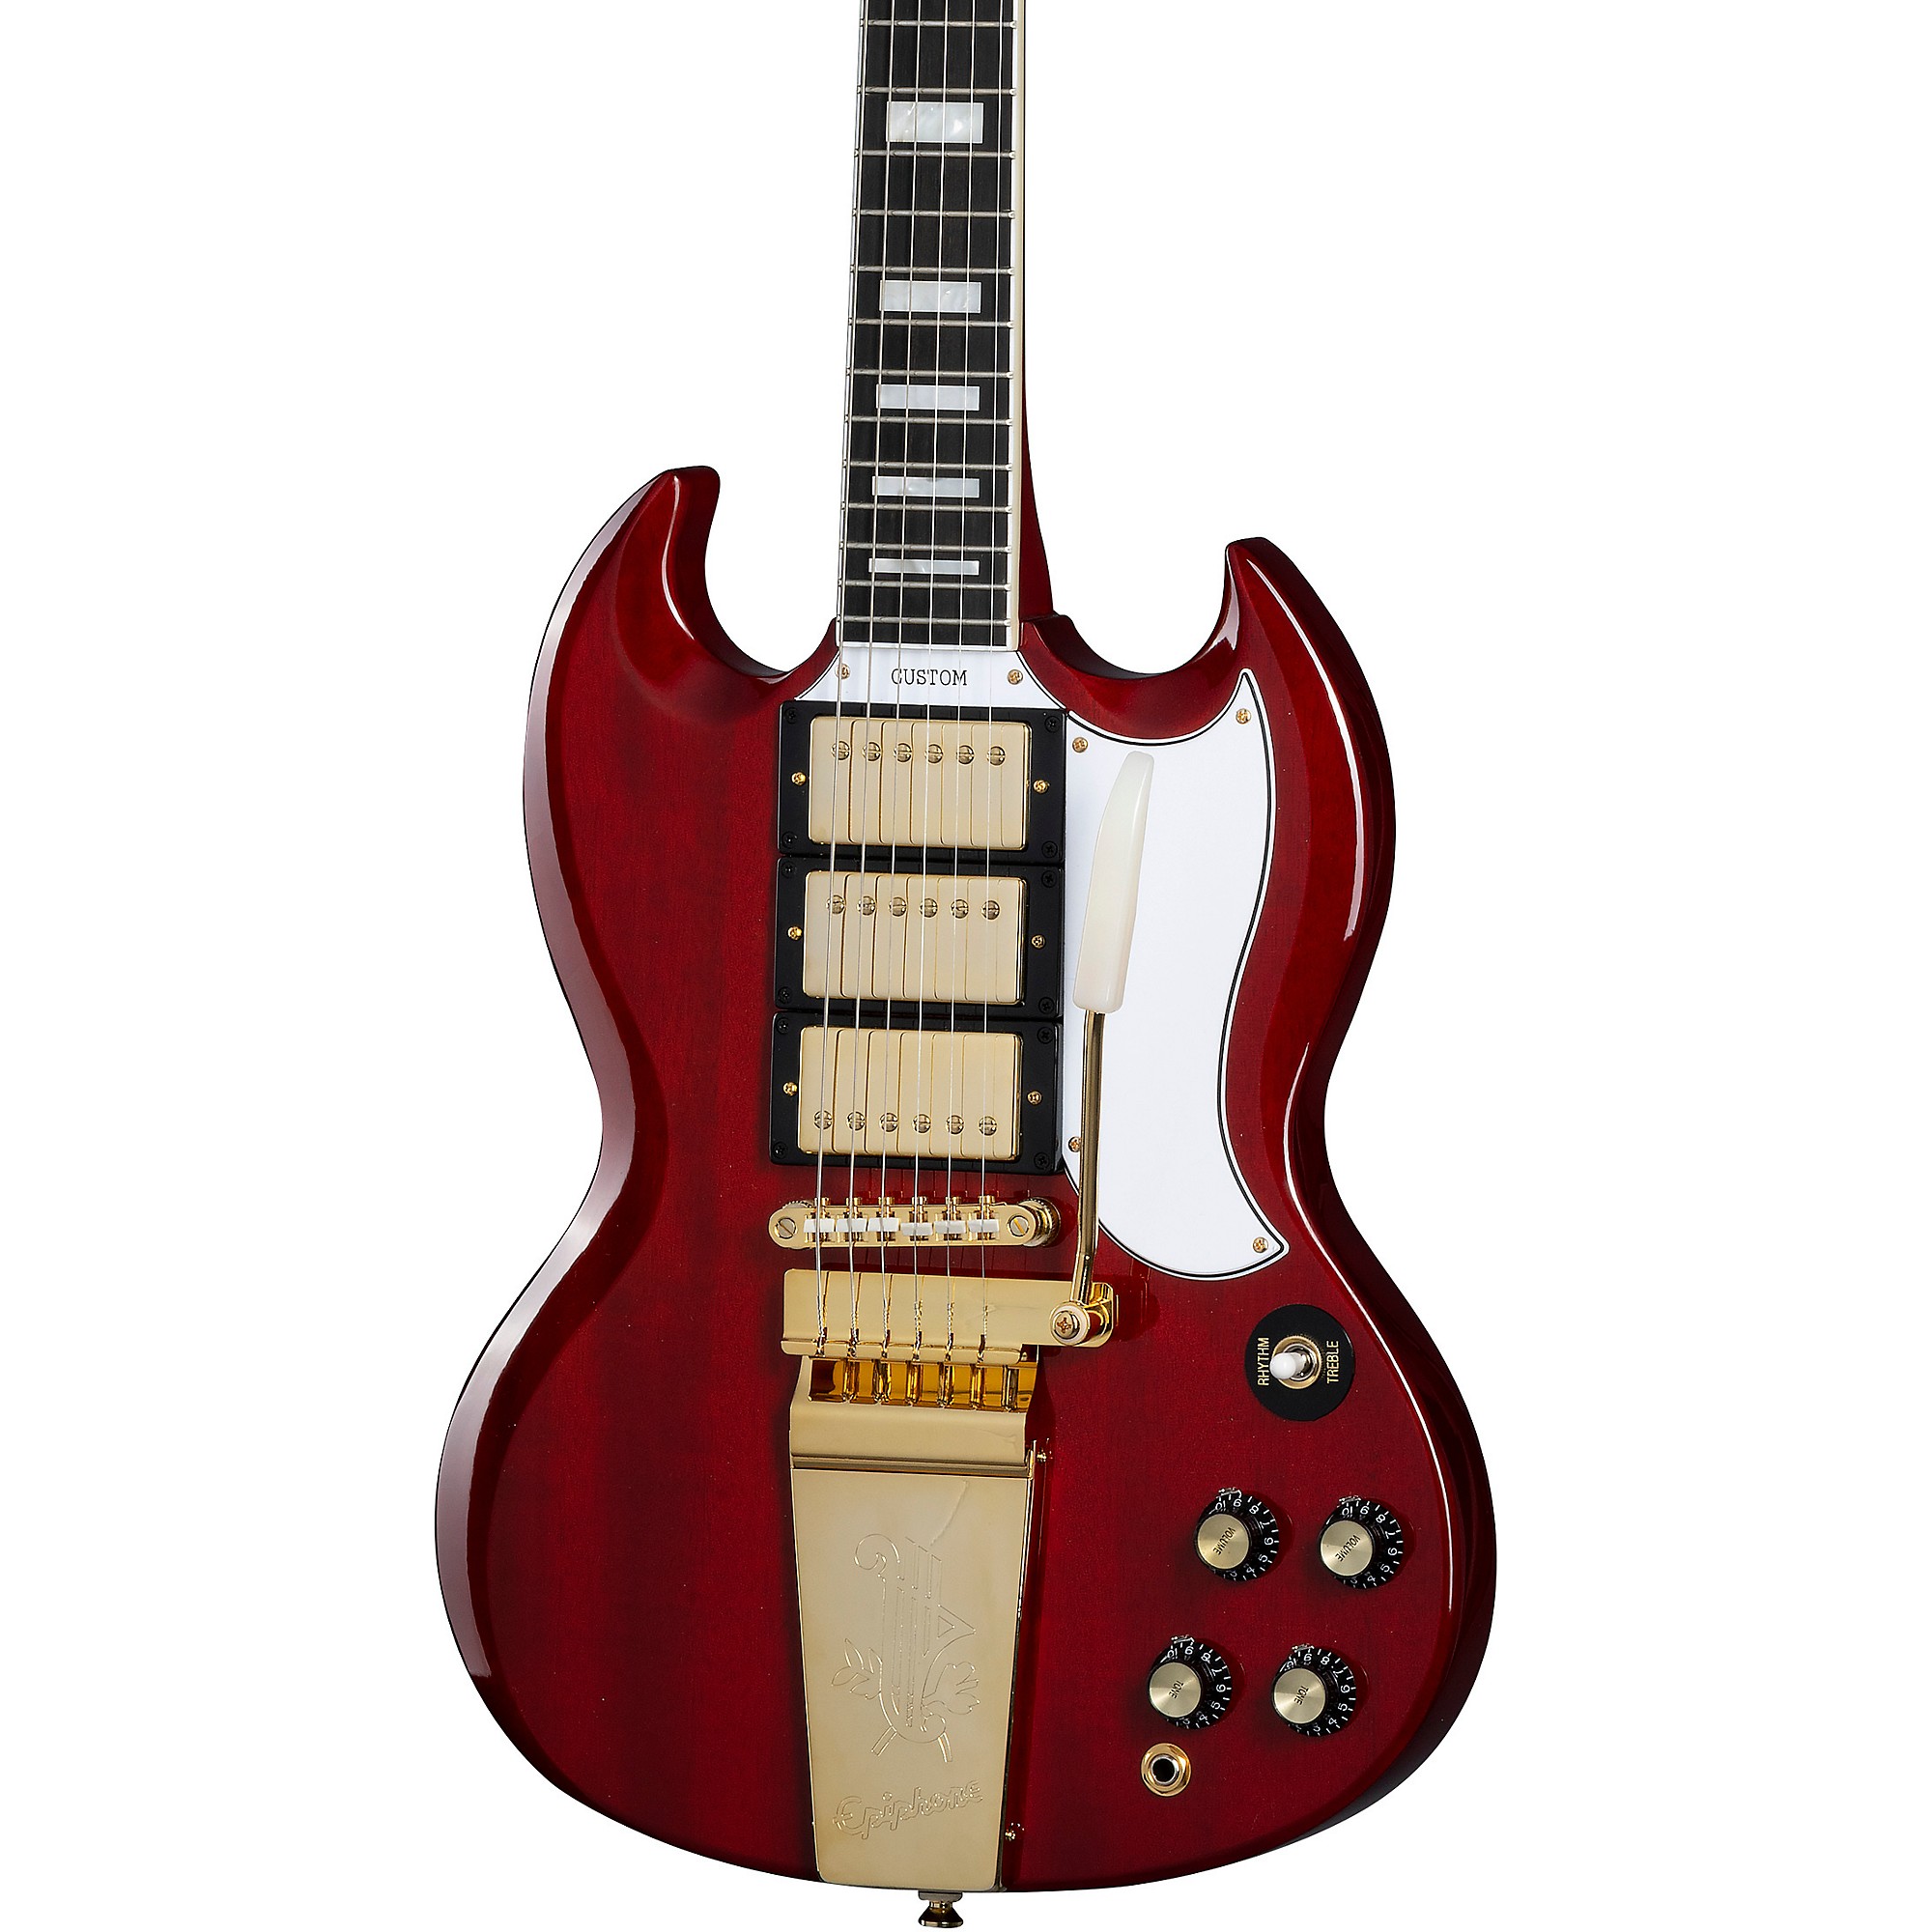 Joe Bonamassa (Official) on X: I bought this guitar from my